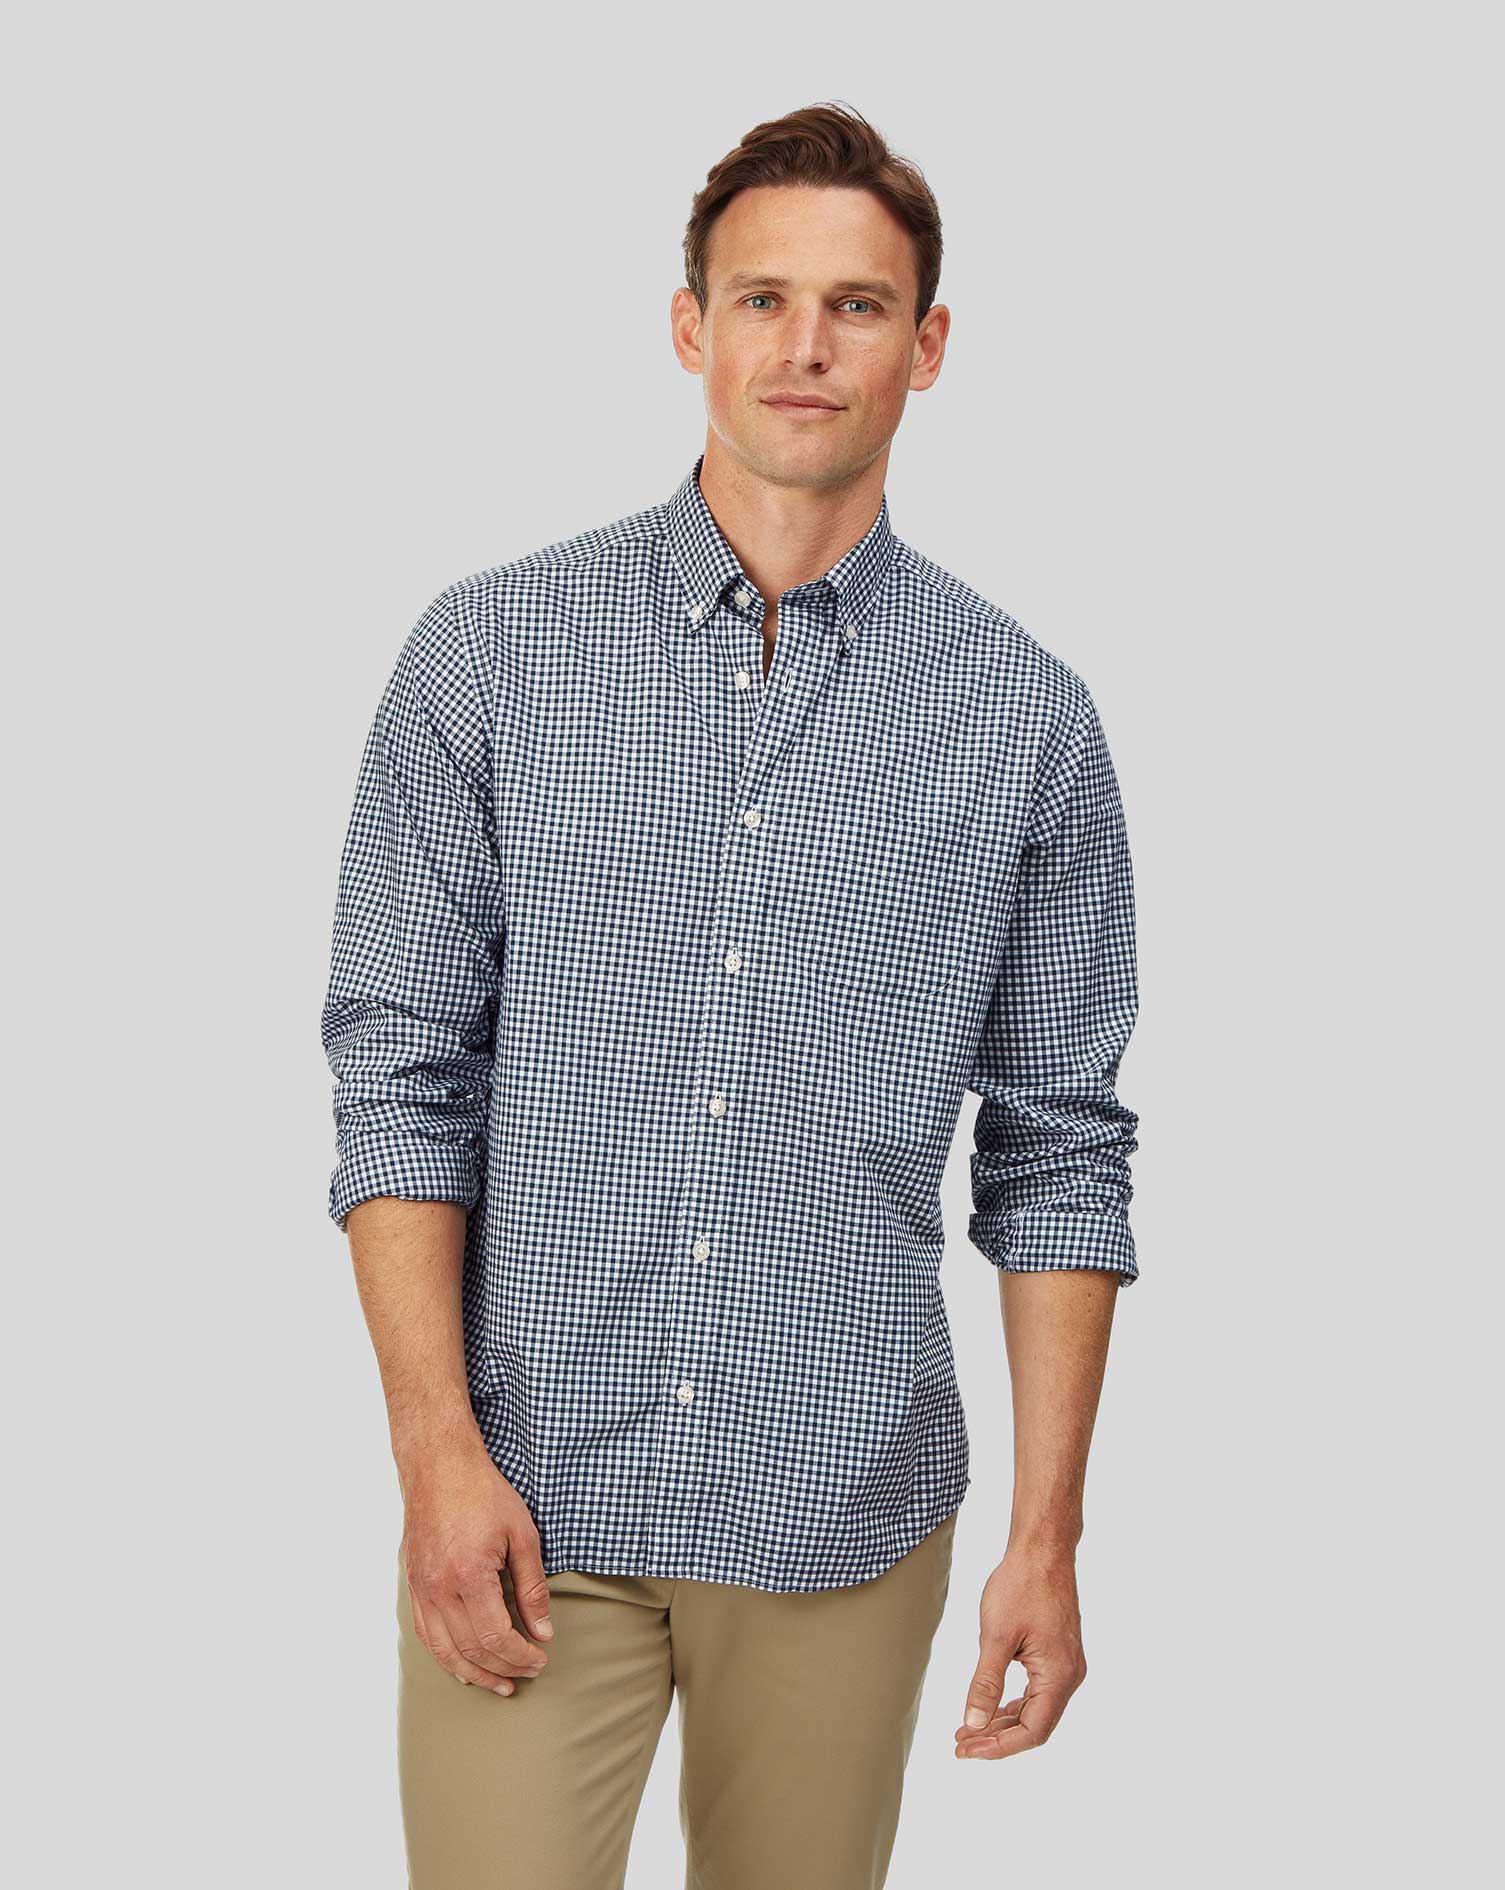 Classic fit soft washed non-iron stretch poplin gingham navy shirt ...